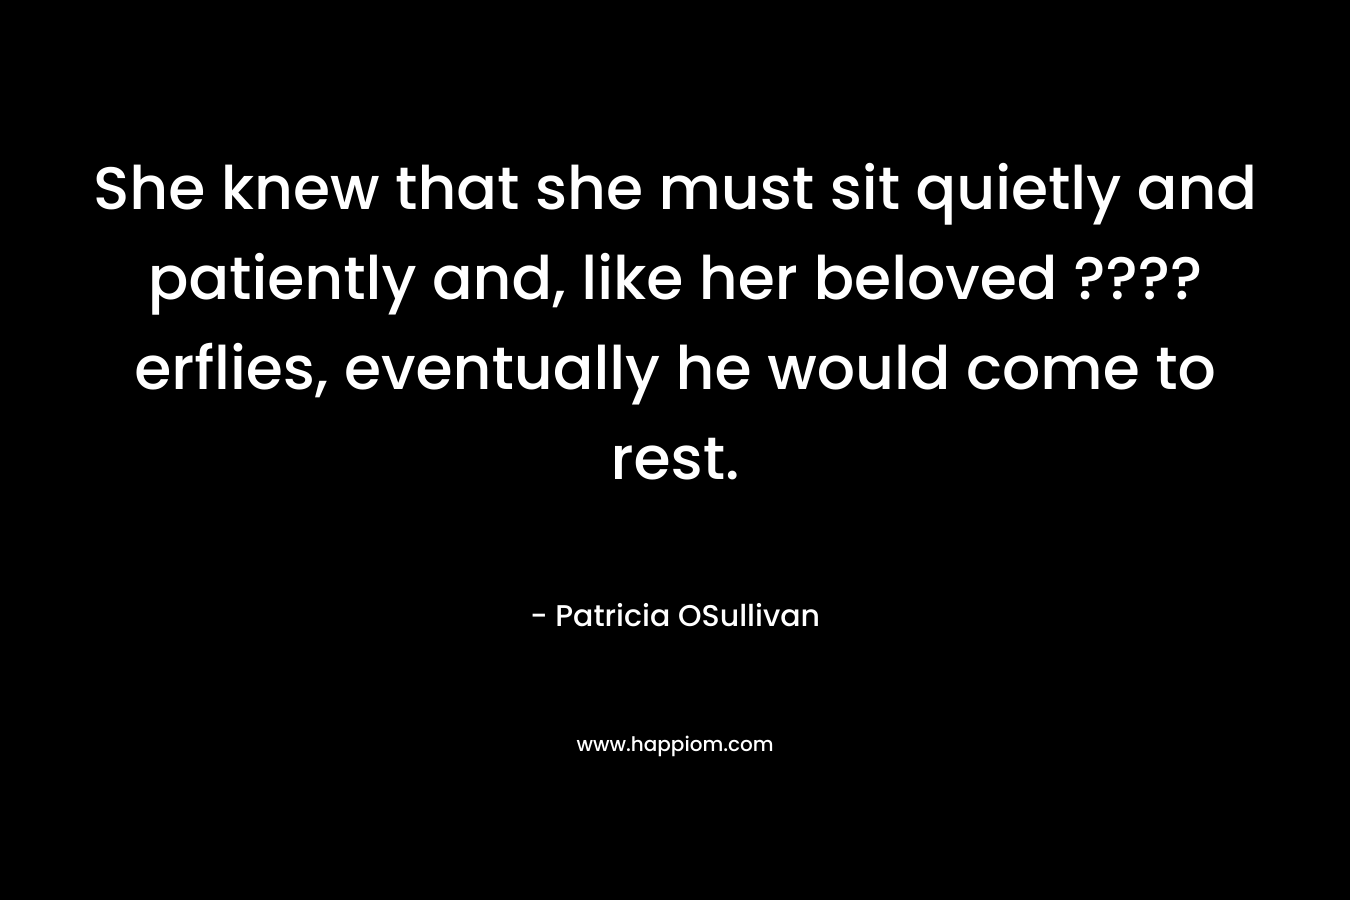 She knew that she must sit quietly and patiently and, like her beloved ????erflies, eventually he would come to rest.